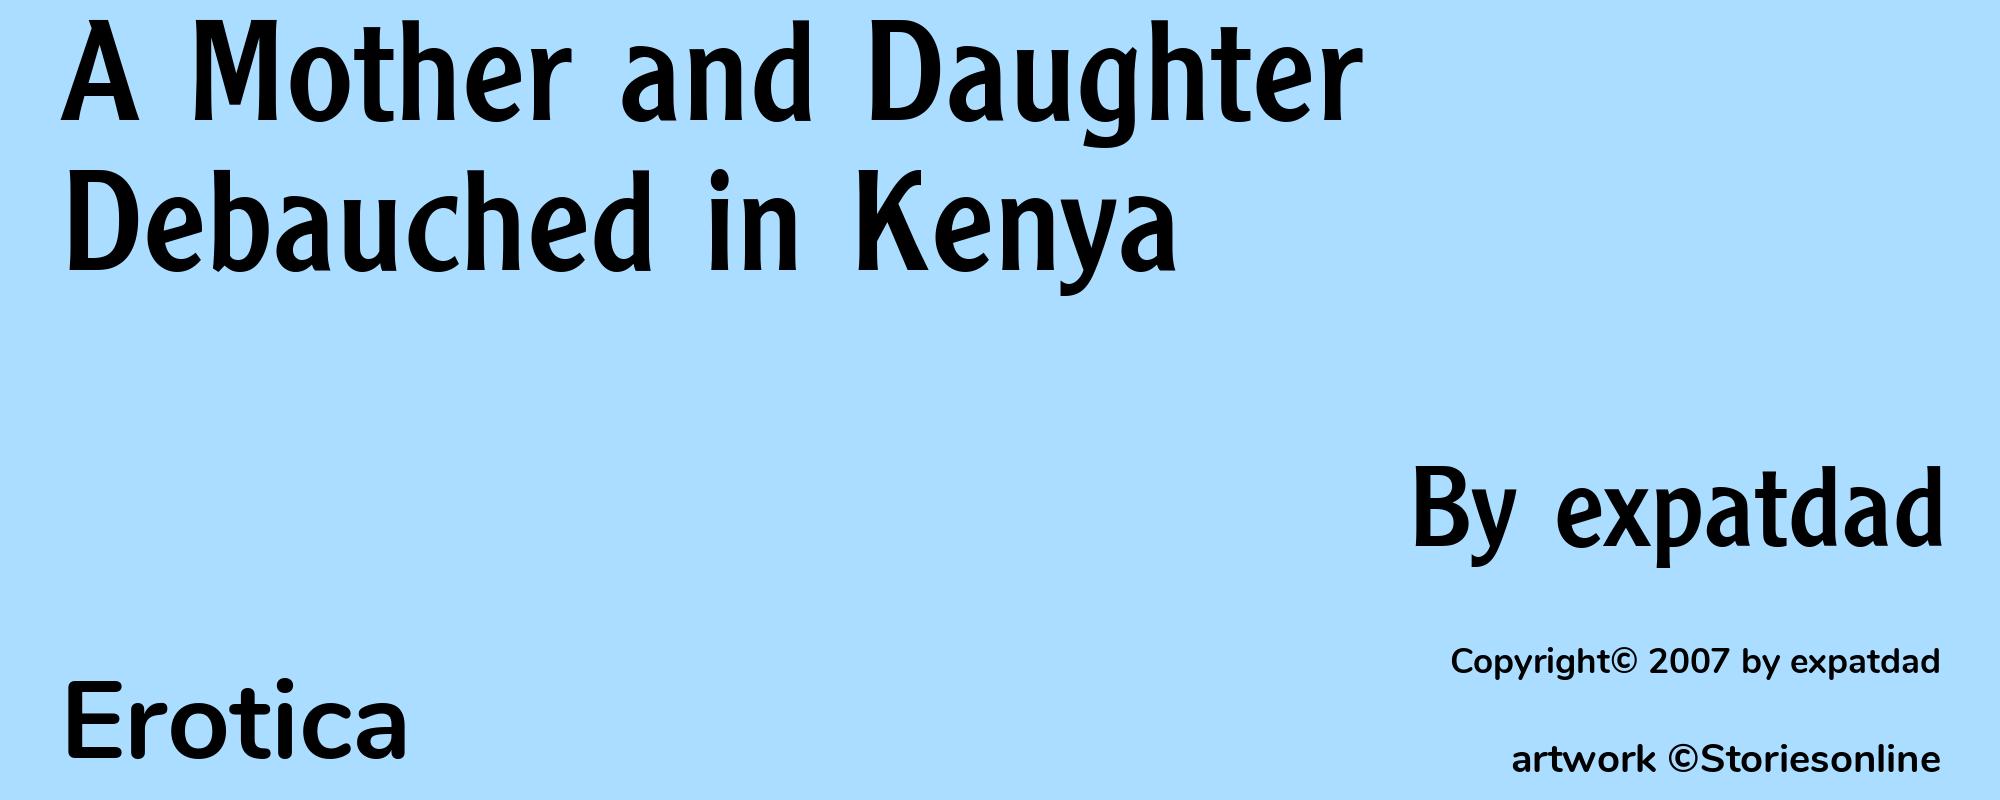 A Mother and Daughter Debauched in Kenya - Cover